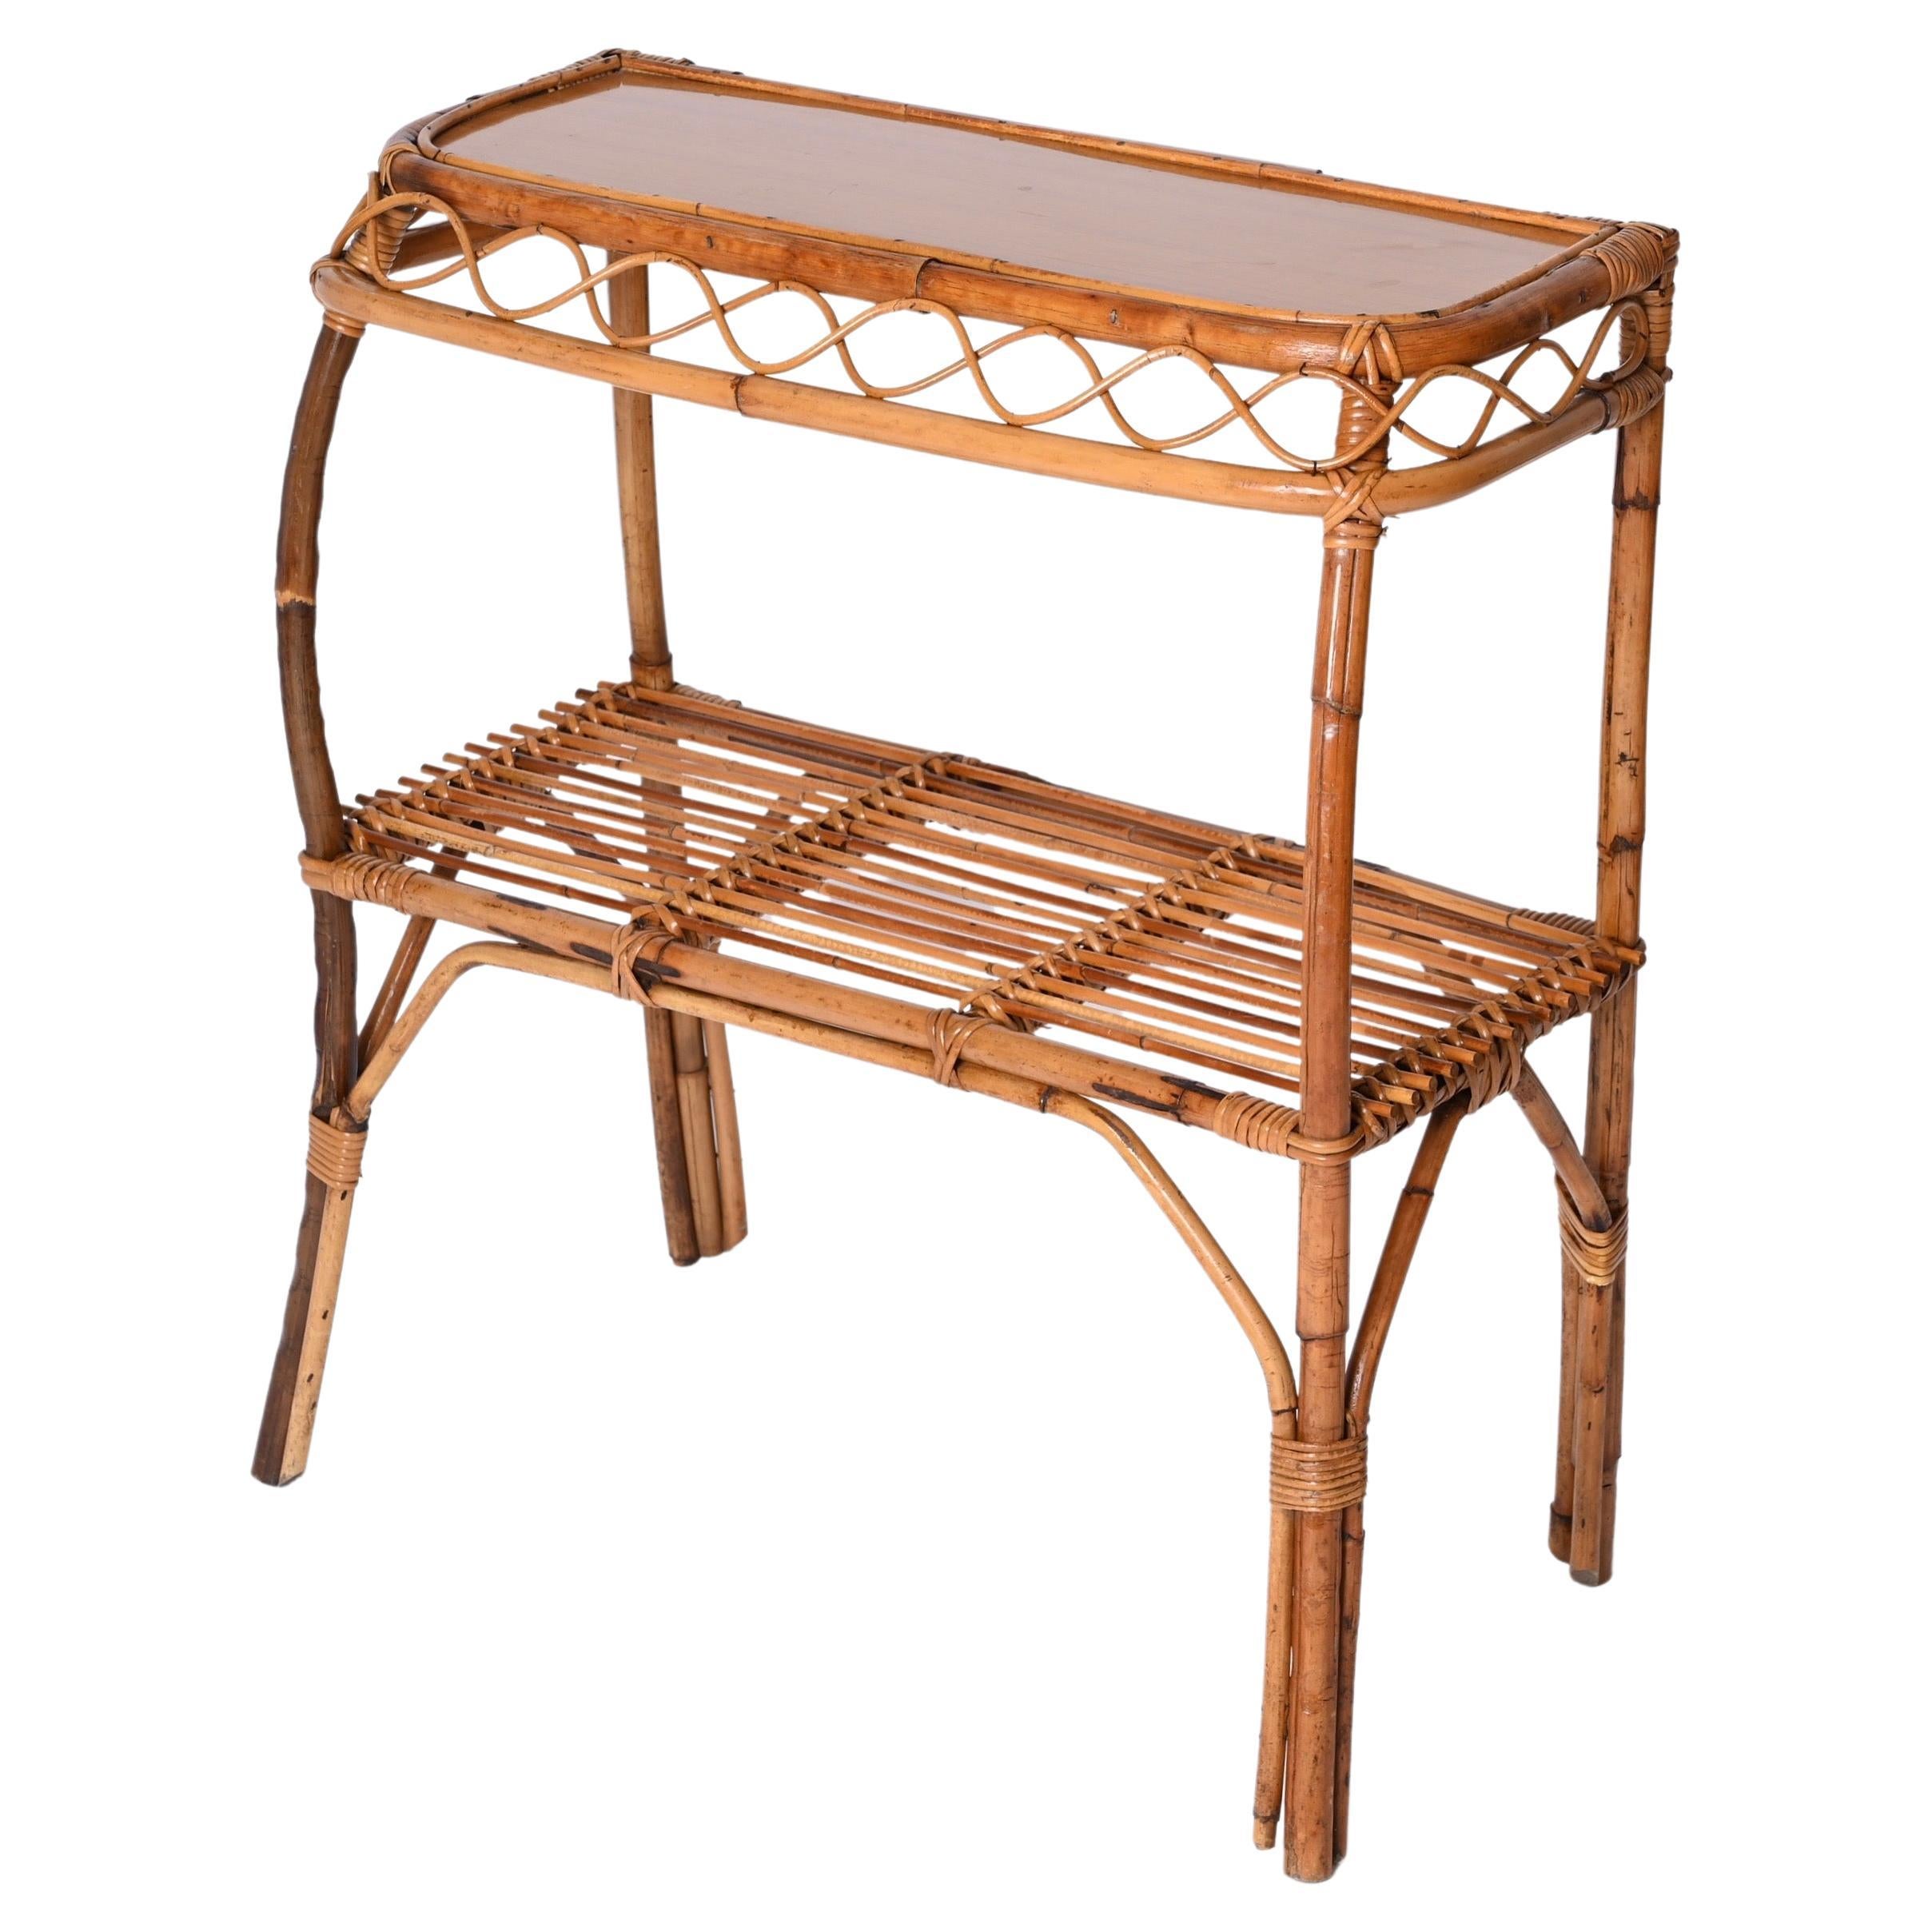 Midcentury Bamboo and Rattan Cocktail Console Table after Franco Albini, 1960s For Sale